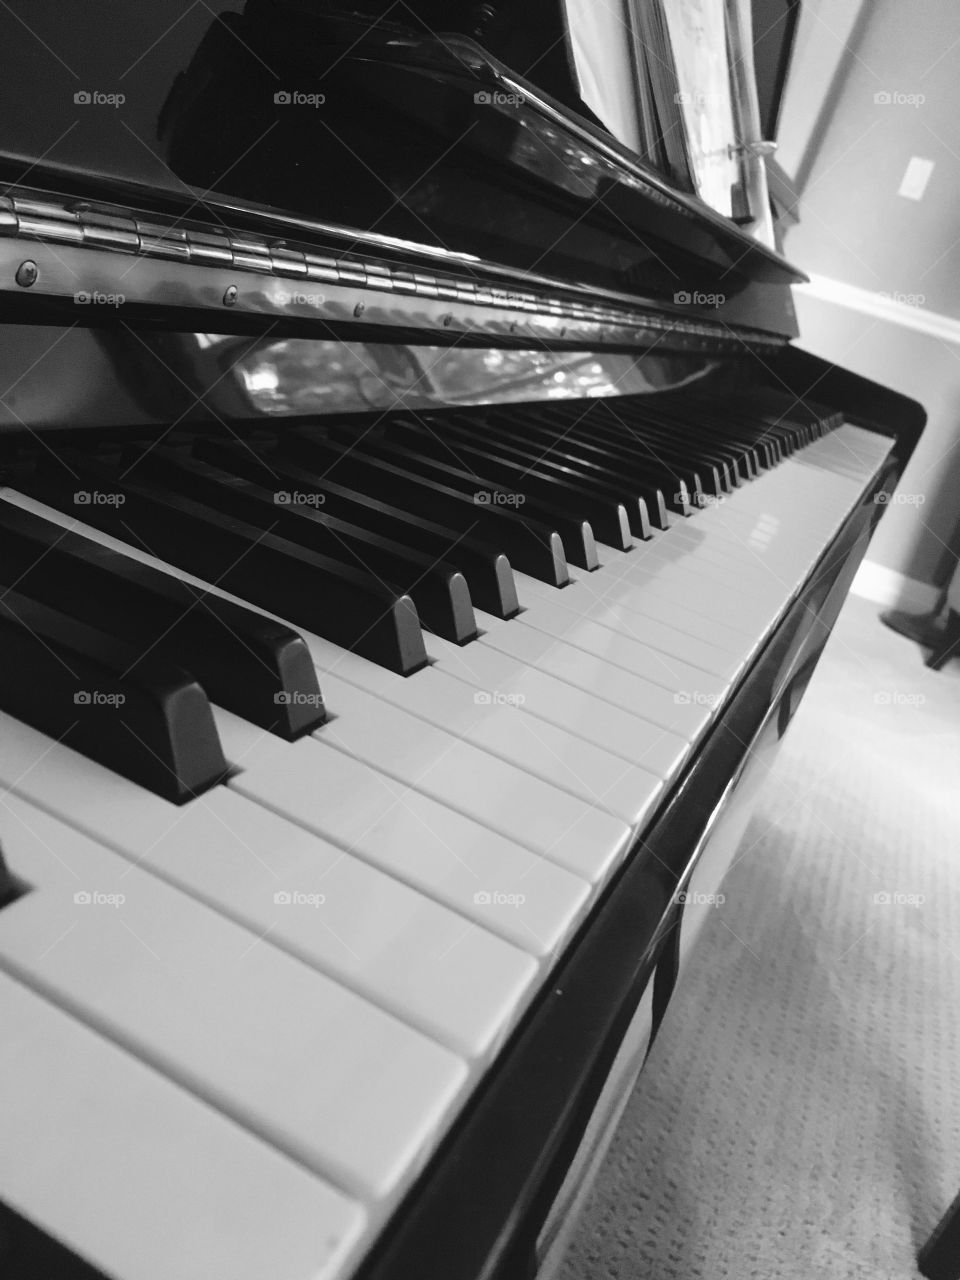 Took a picture of my piano 